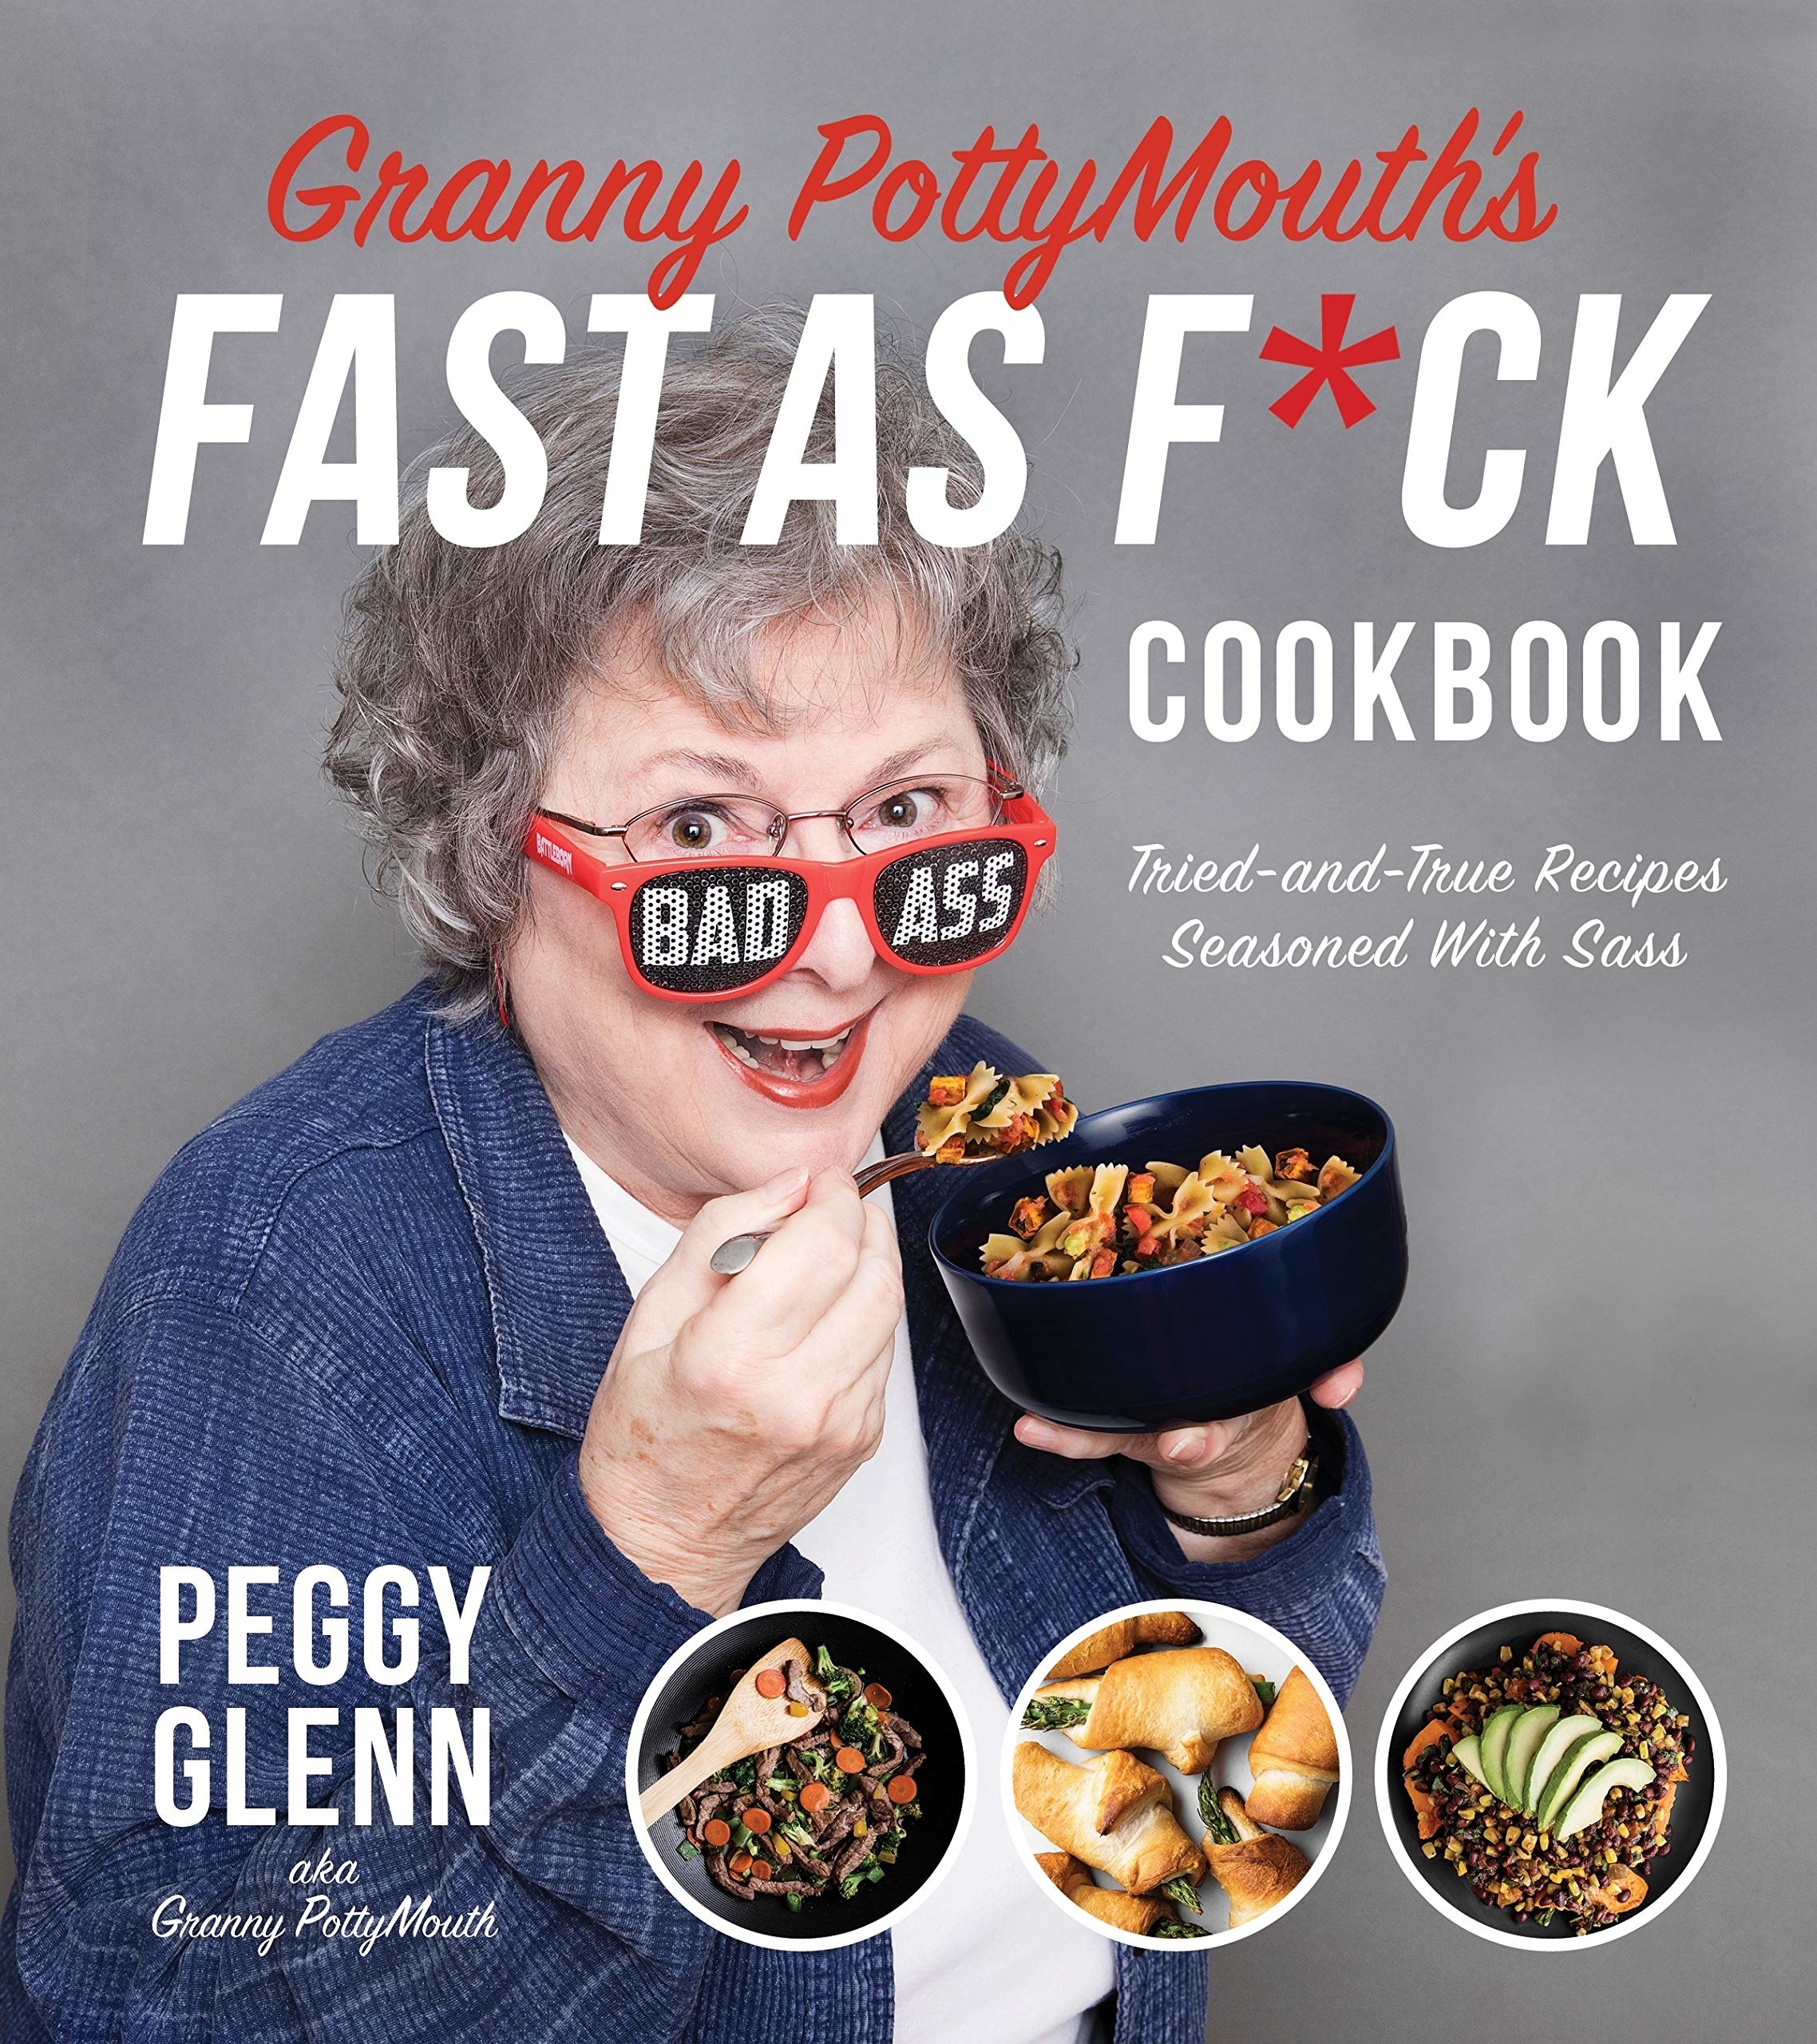 the cover of book with grandmother eating food